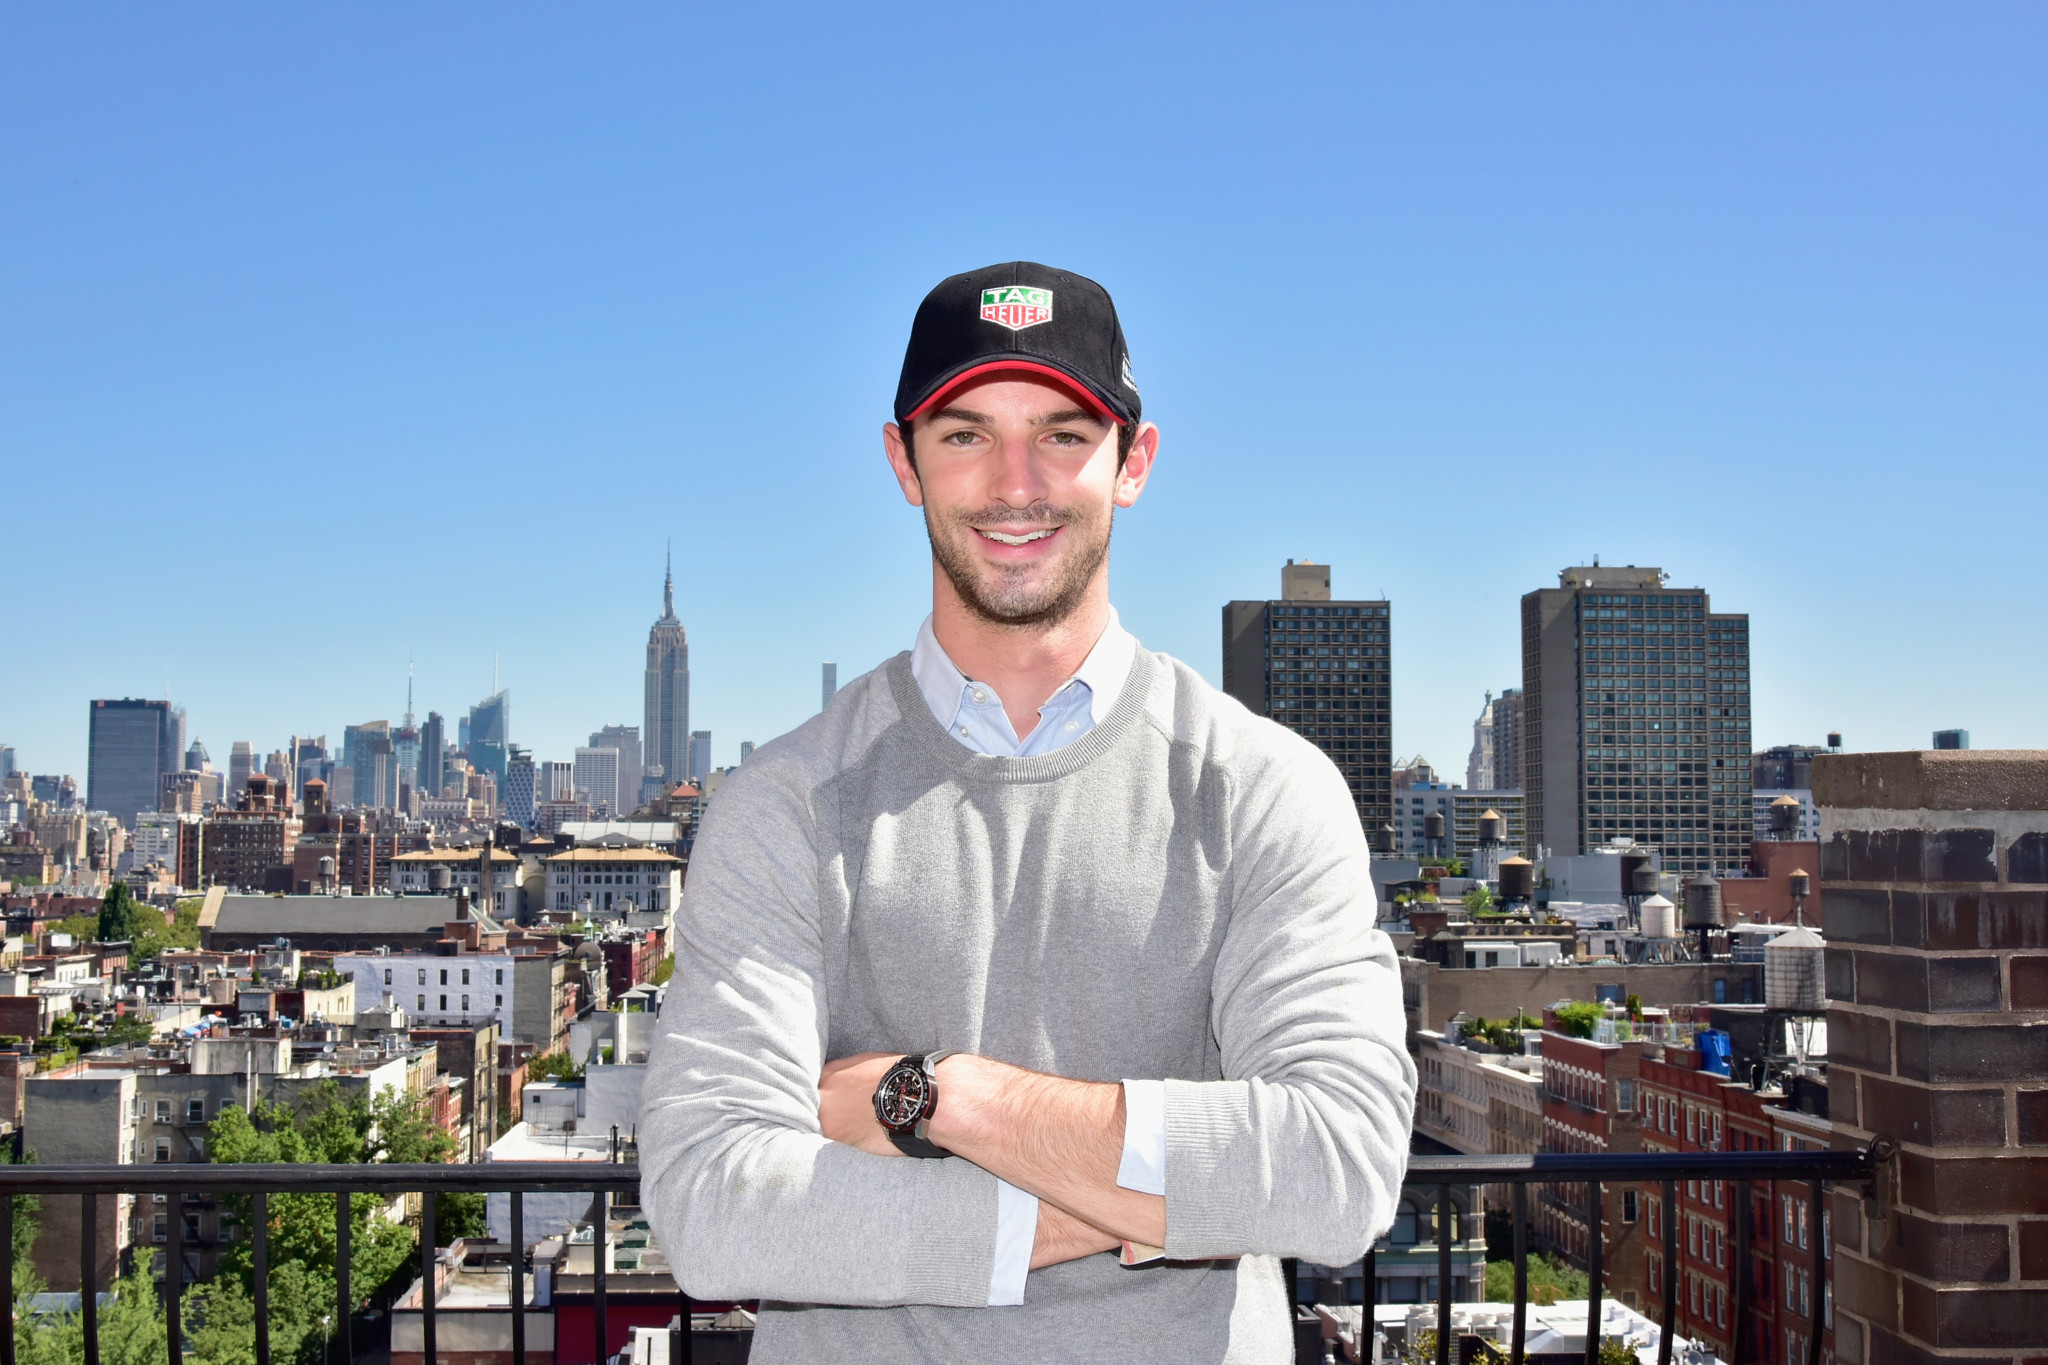 Alexander rossi is tag heuer new friends of the brand 2